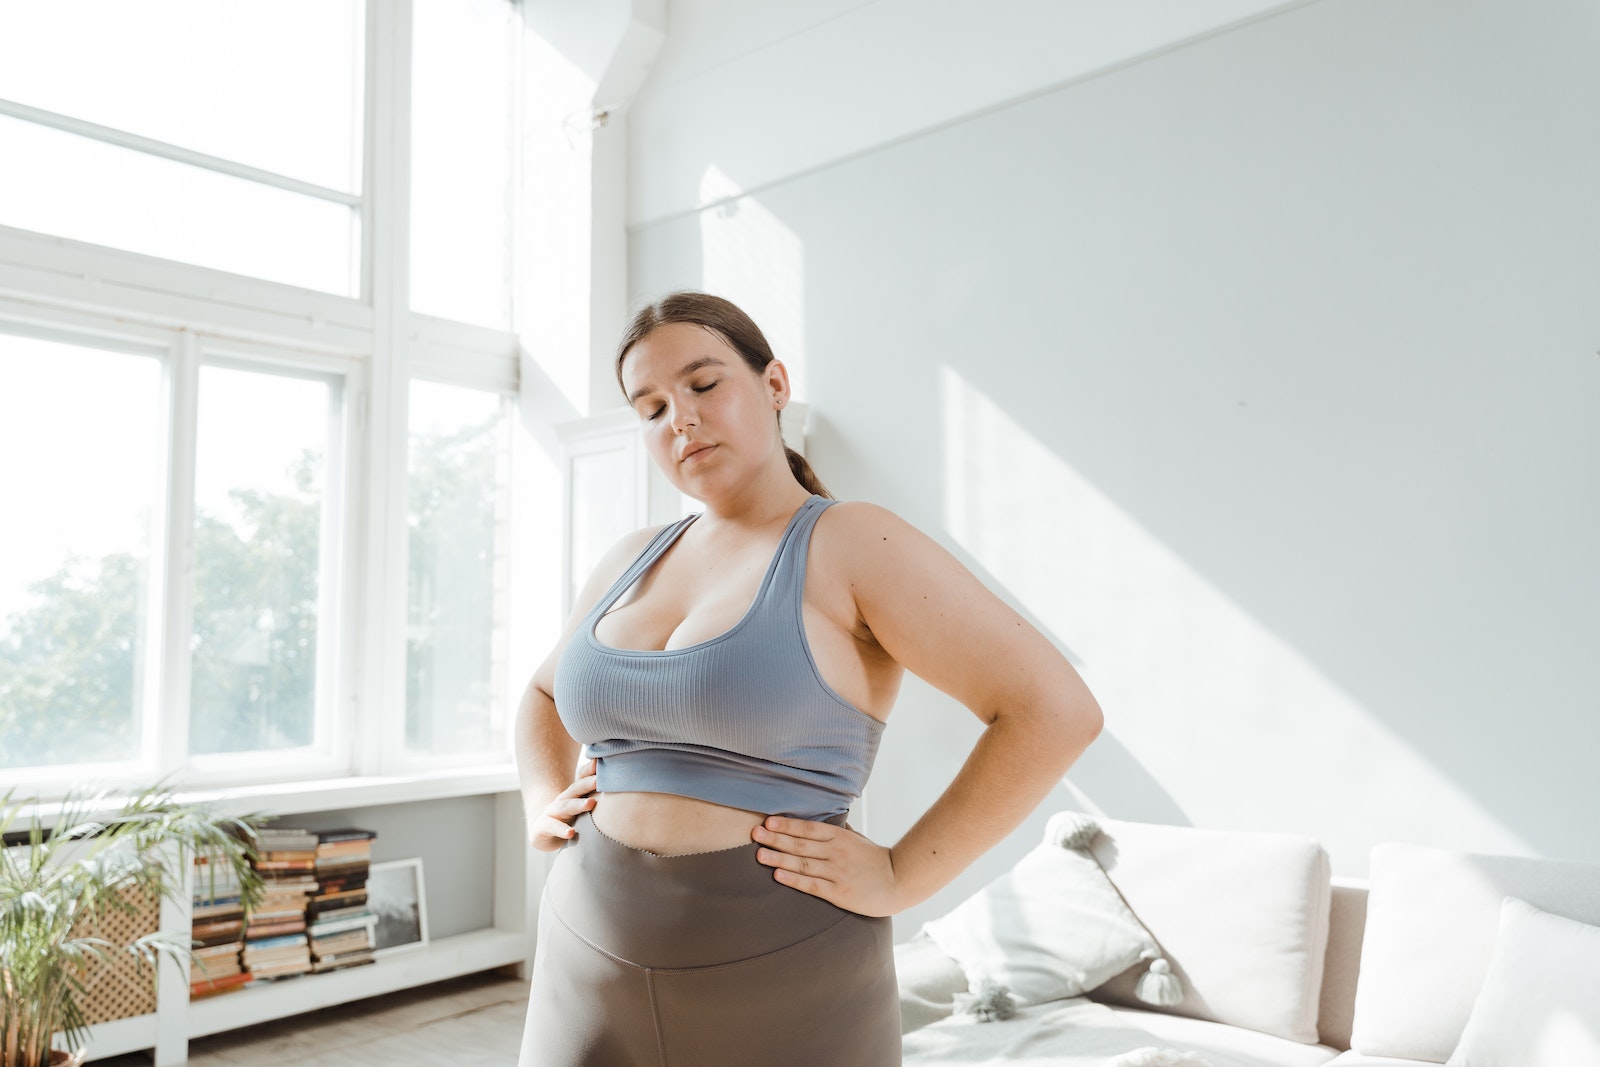 The Relationship between Emotional Intelligence and Obesity body acceptance